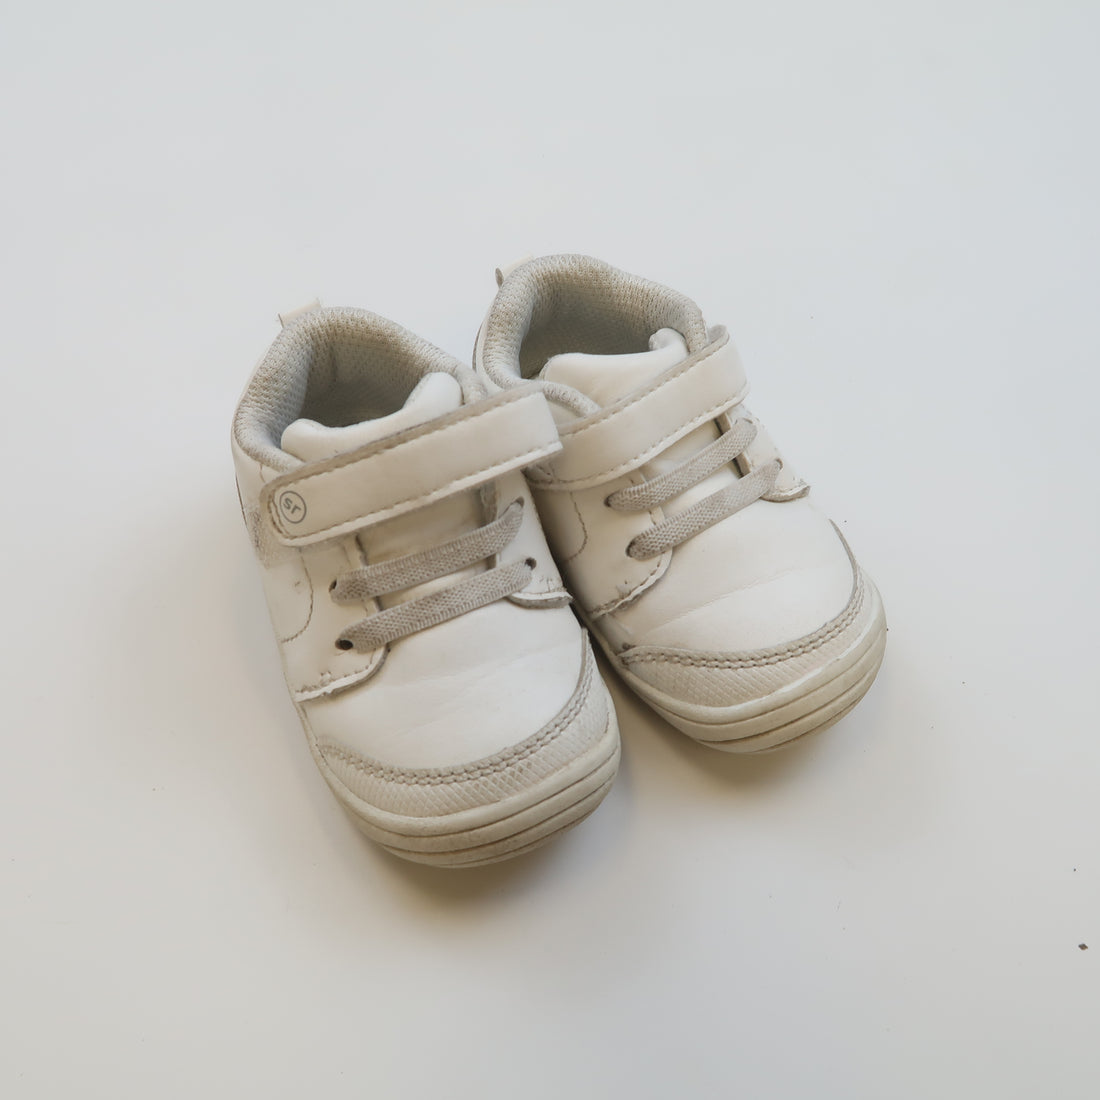 Stride Rite - Shoes (Shoes - 4)